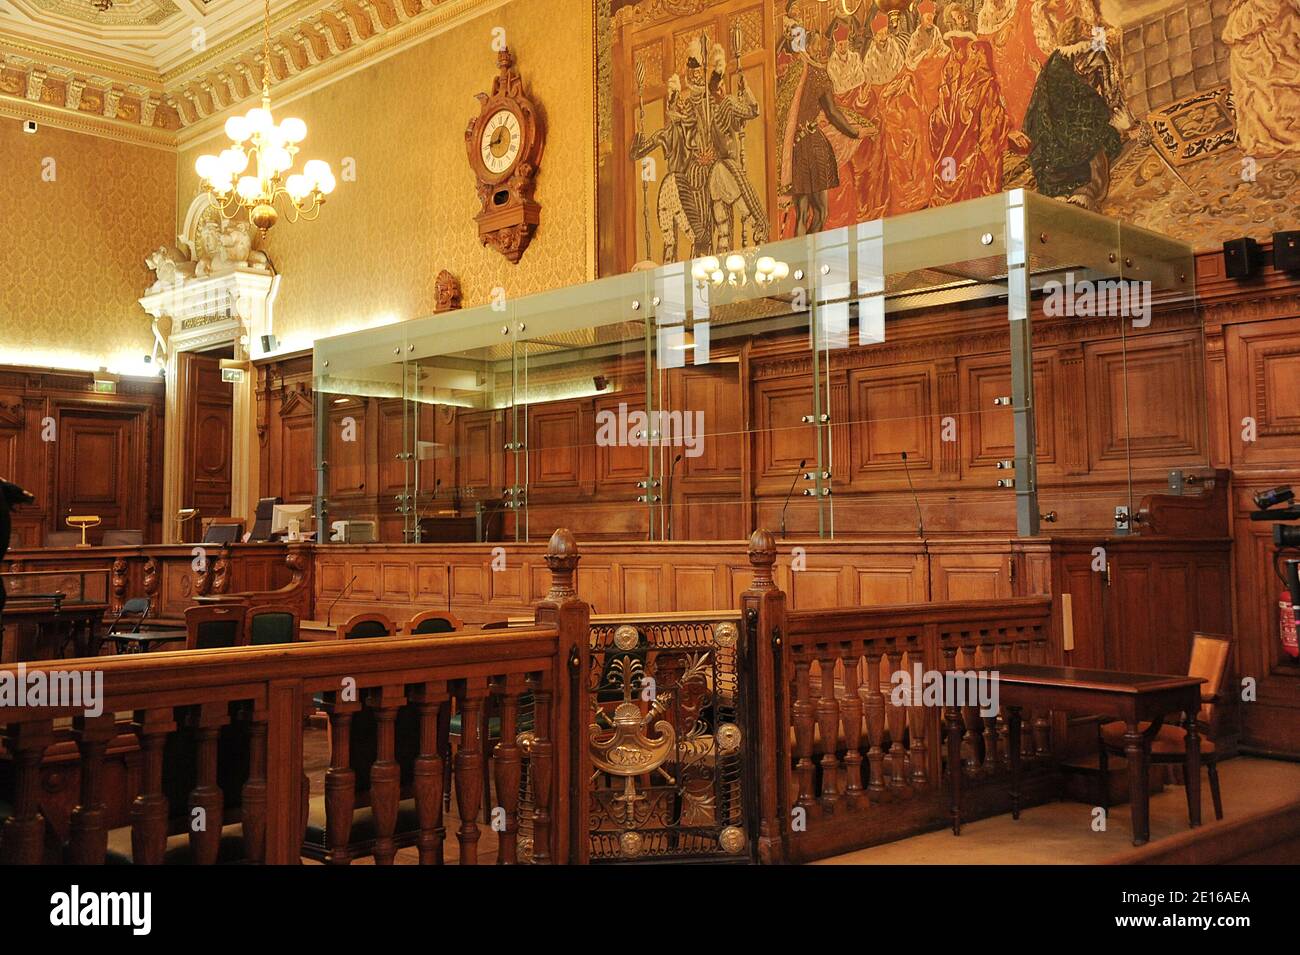 View of the appeal courtroom in Paris court hall in Paris, France on May 2, 2011 in whom will take place the Yvan Colonna's appeal trial for the murder in 1998 of Claude Erignac, France's top state official on the Mediterranean island of Corsica. Photo by Giancarlo Gorassini/ABACAPRESS.COM Stock Photo